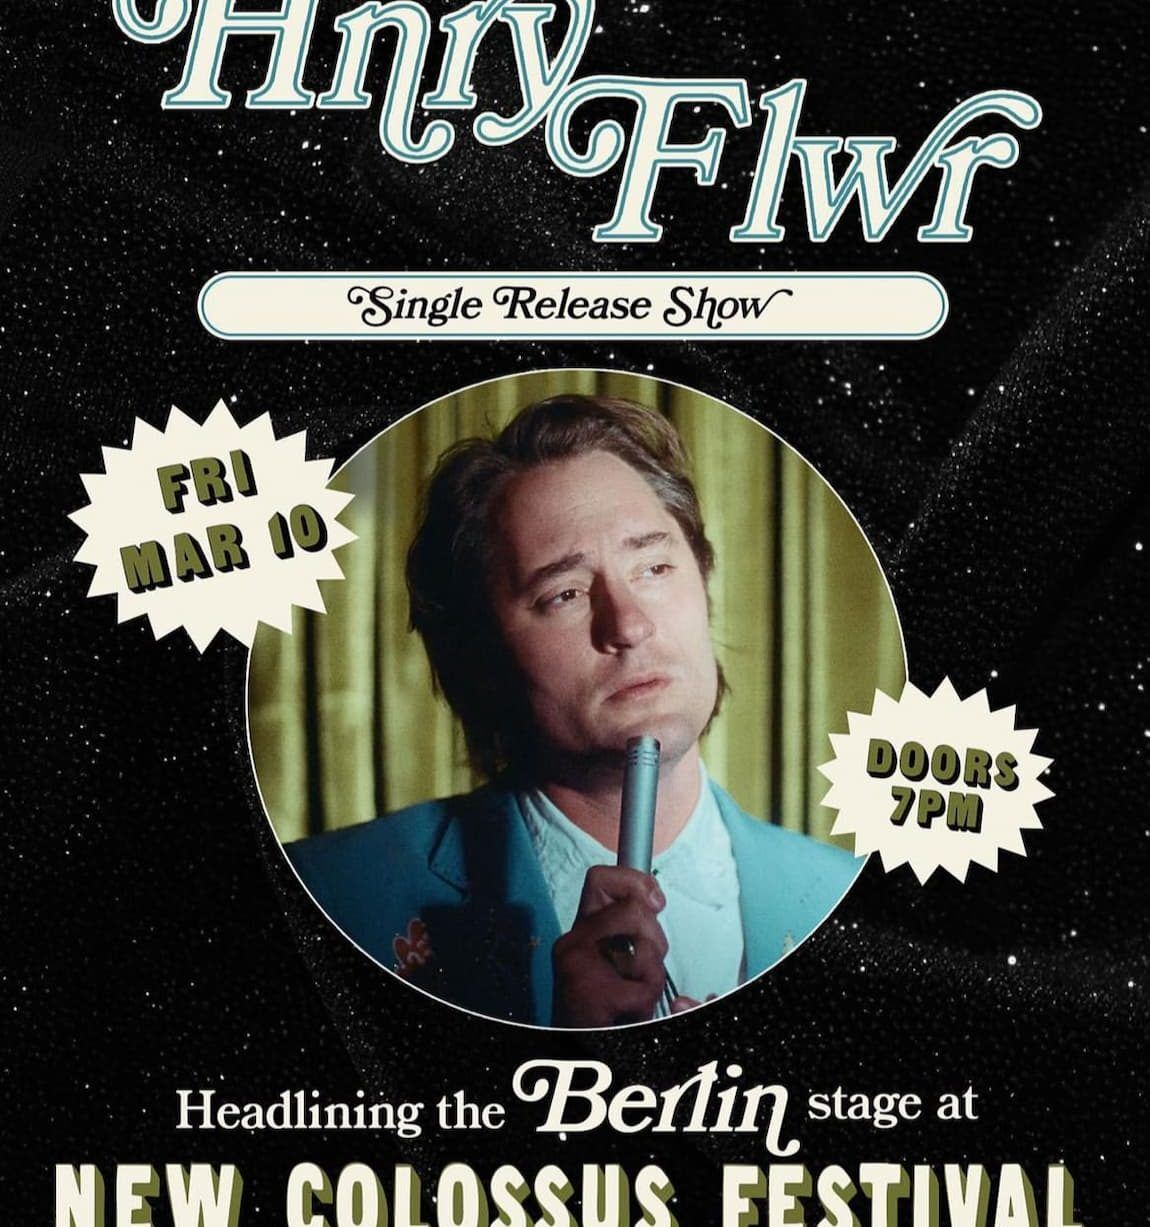 HNRY FLWR headlining the Berlin stage at New Colossus Festival